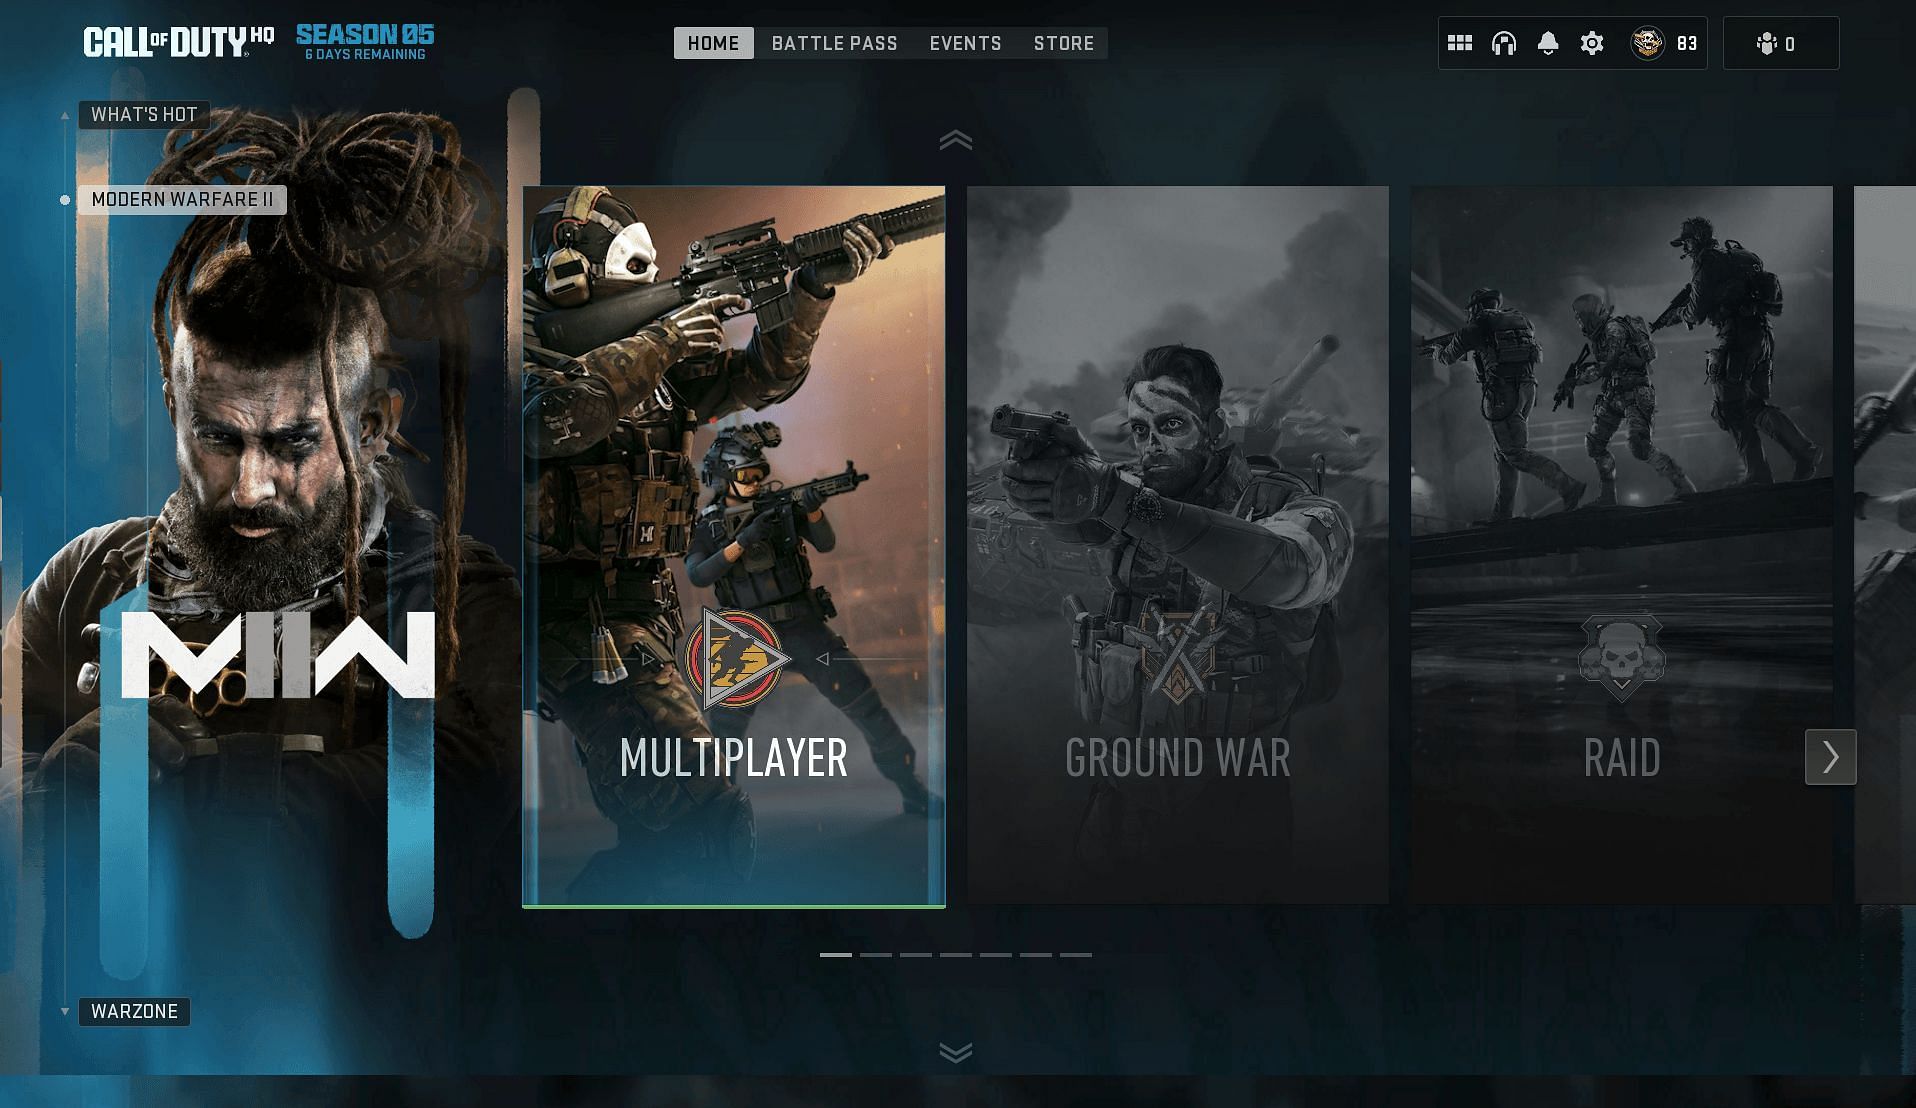 The Landing Page of CODHQ has changed in Modern Warfare 2 Season 5 (Image via Activision)